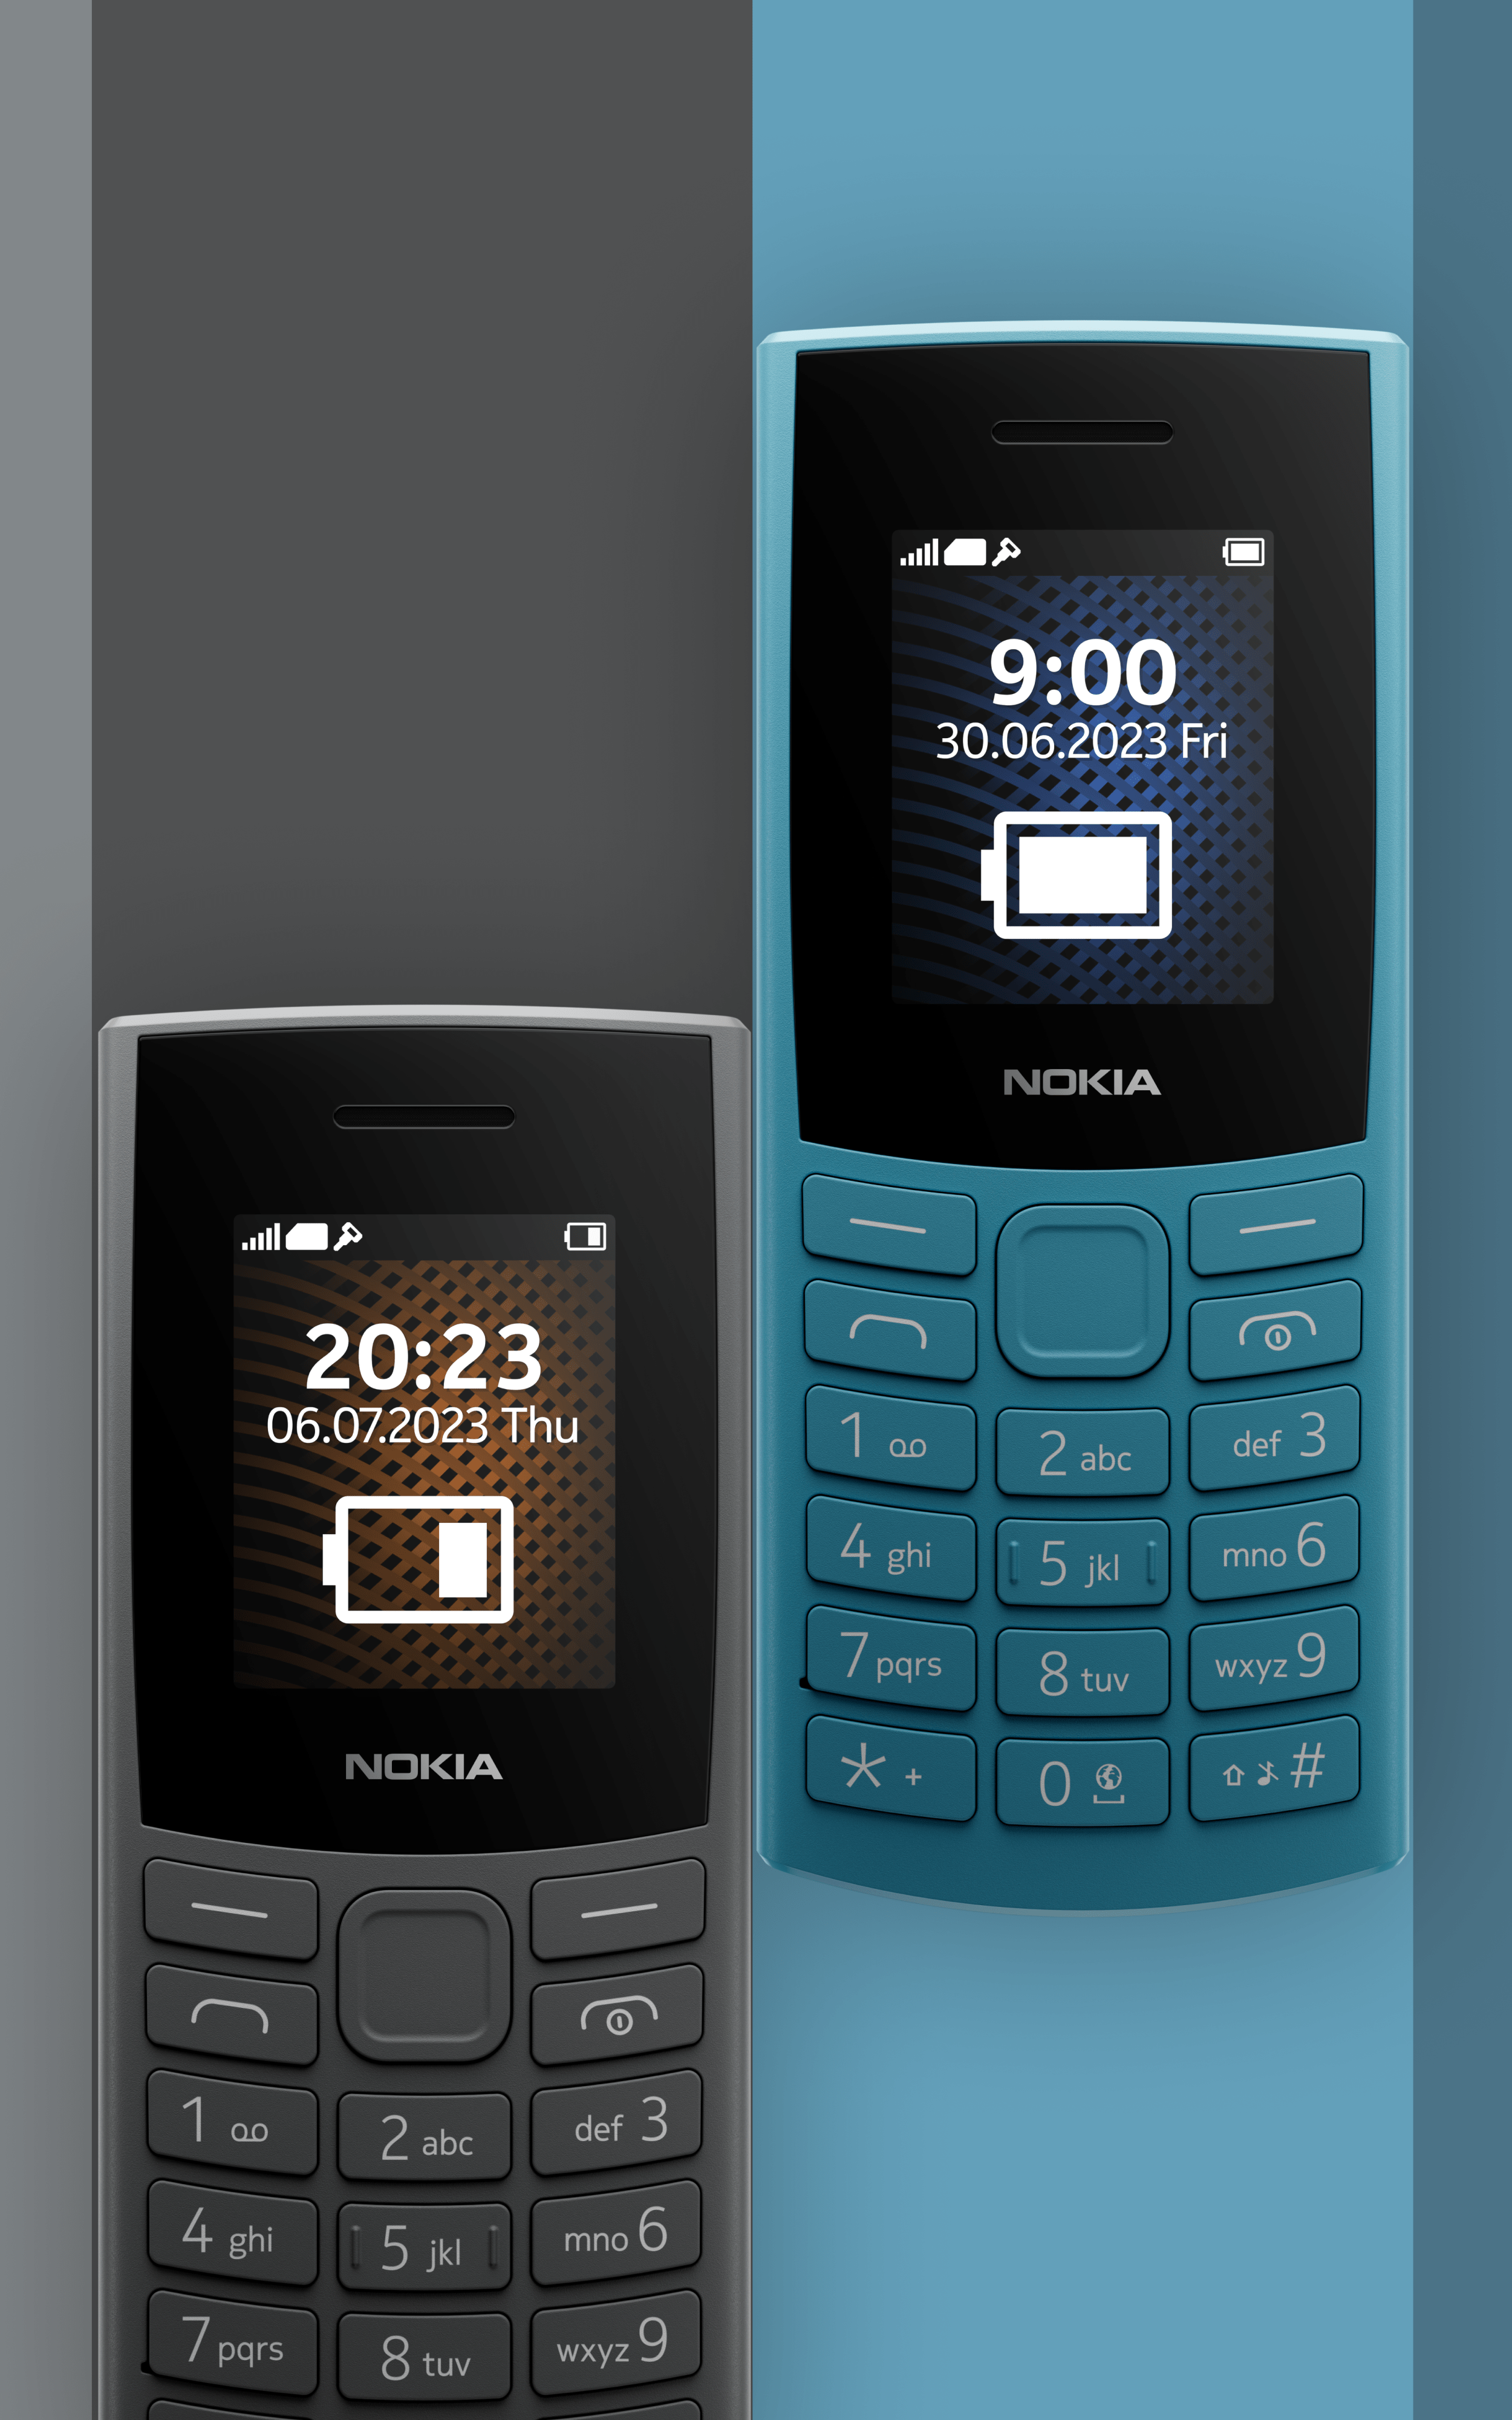 with phone Nokia internet feature 105 4G